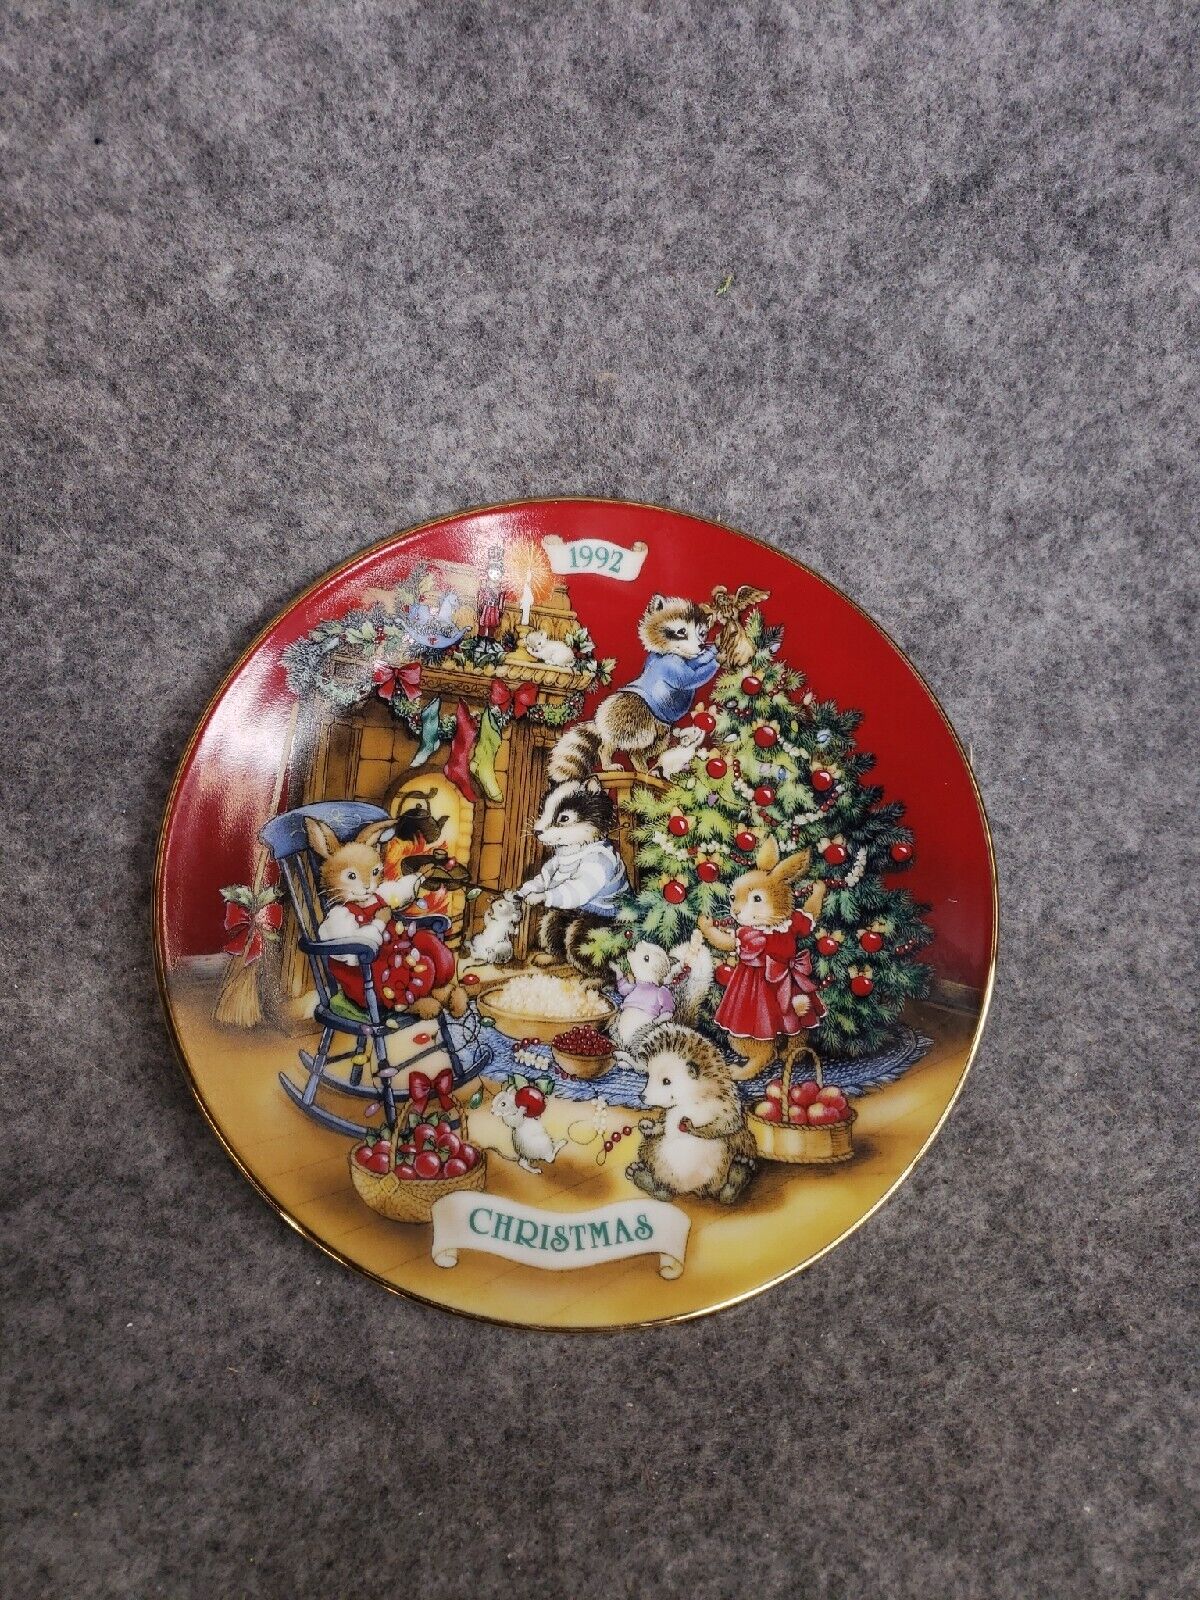 Vintage Avon Commemorative Plate Sharing Christmas with Friends 1992 22K Gold 8